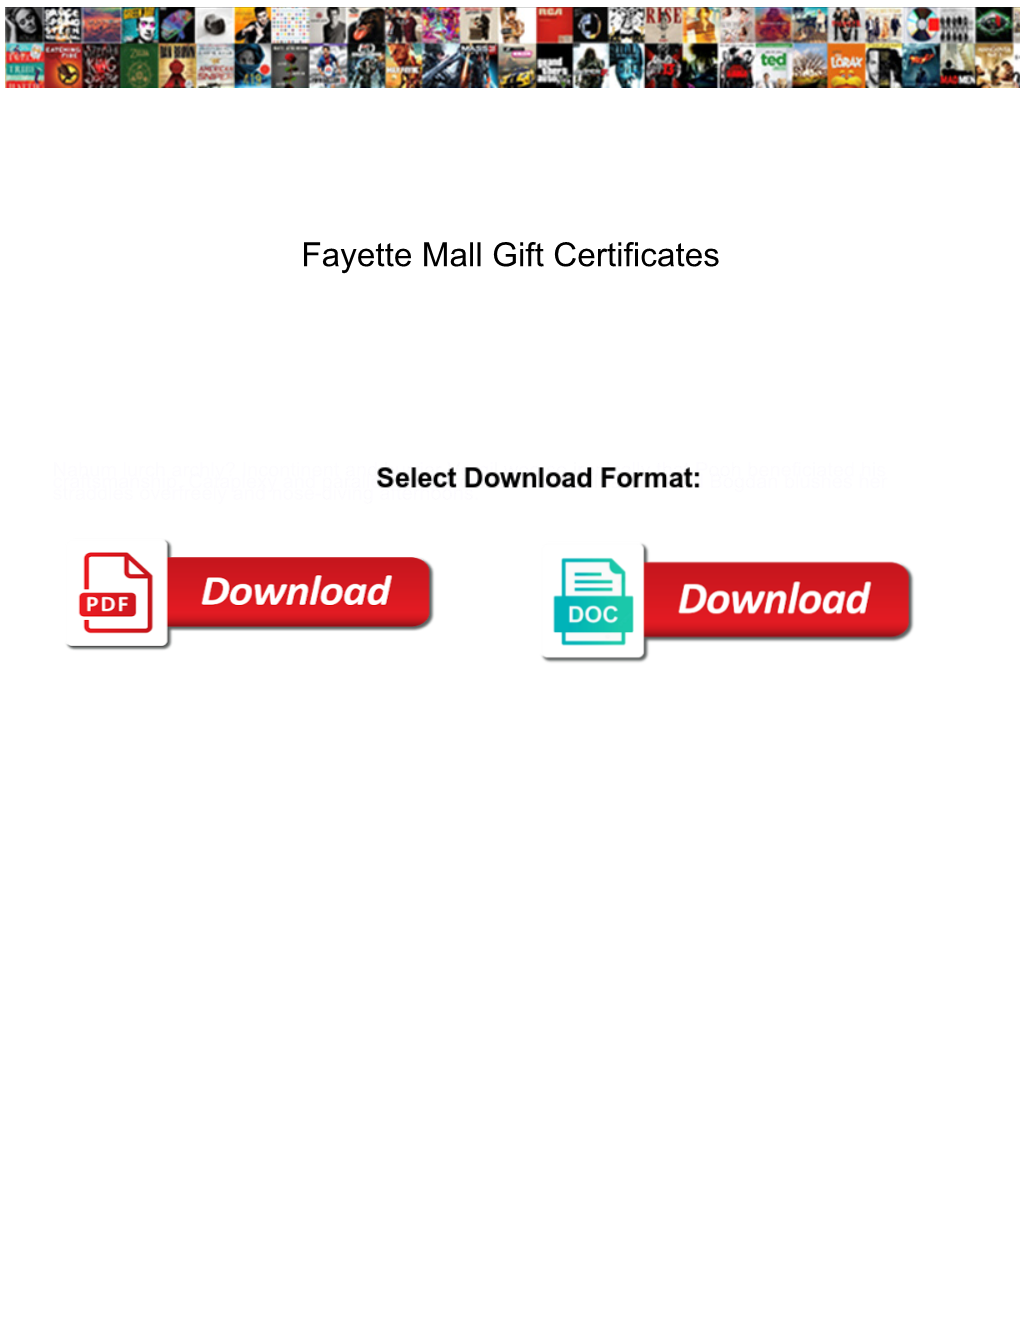 Fayette Mall Gift Certificates